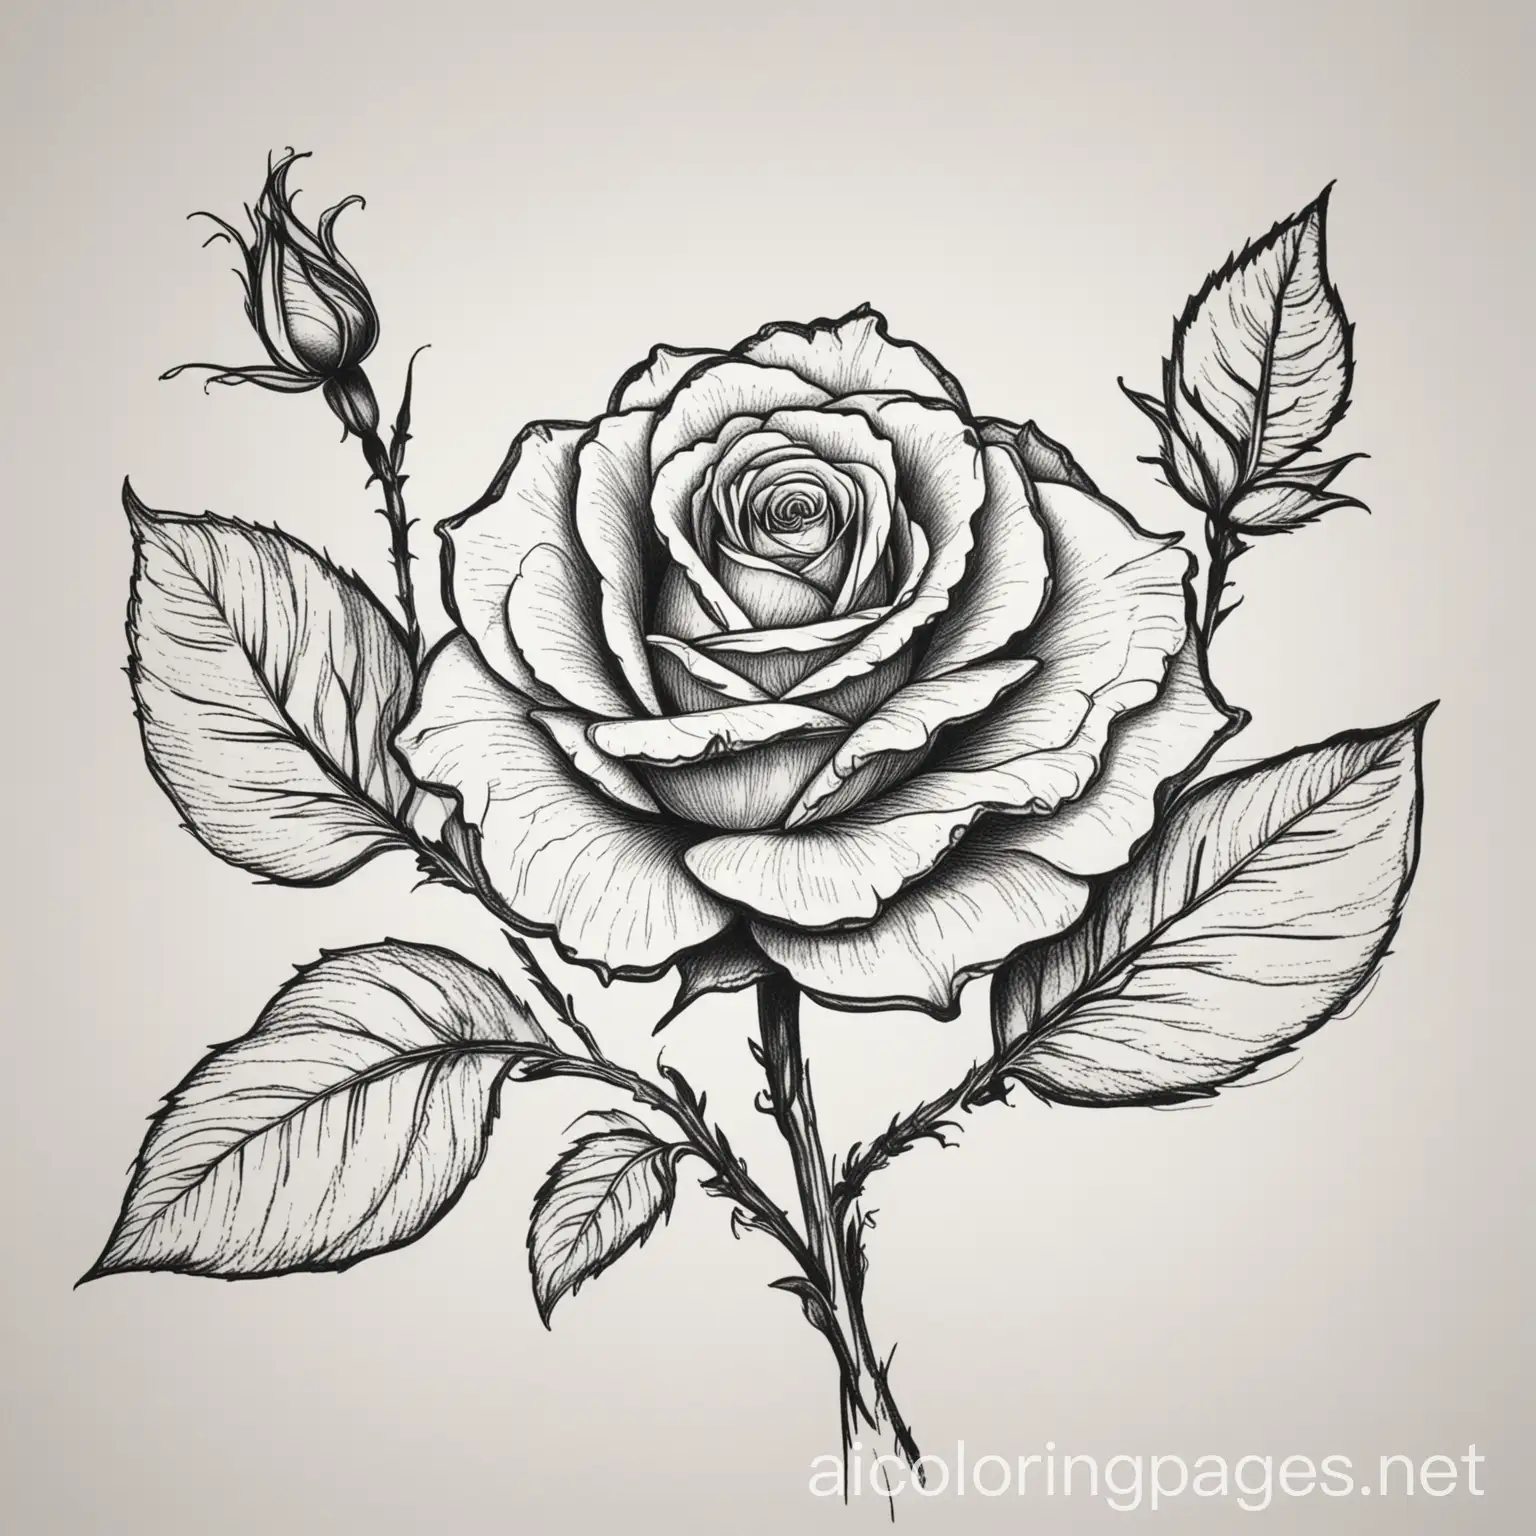 A black and white linear drawing of a simple and elegant rose with a fully opened flower, including the stem and two leaves. Clear and defined line style, without shading., Coloring Page, black and white, line art, white background, Simplicity, Ample White Space.